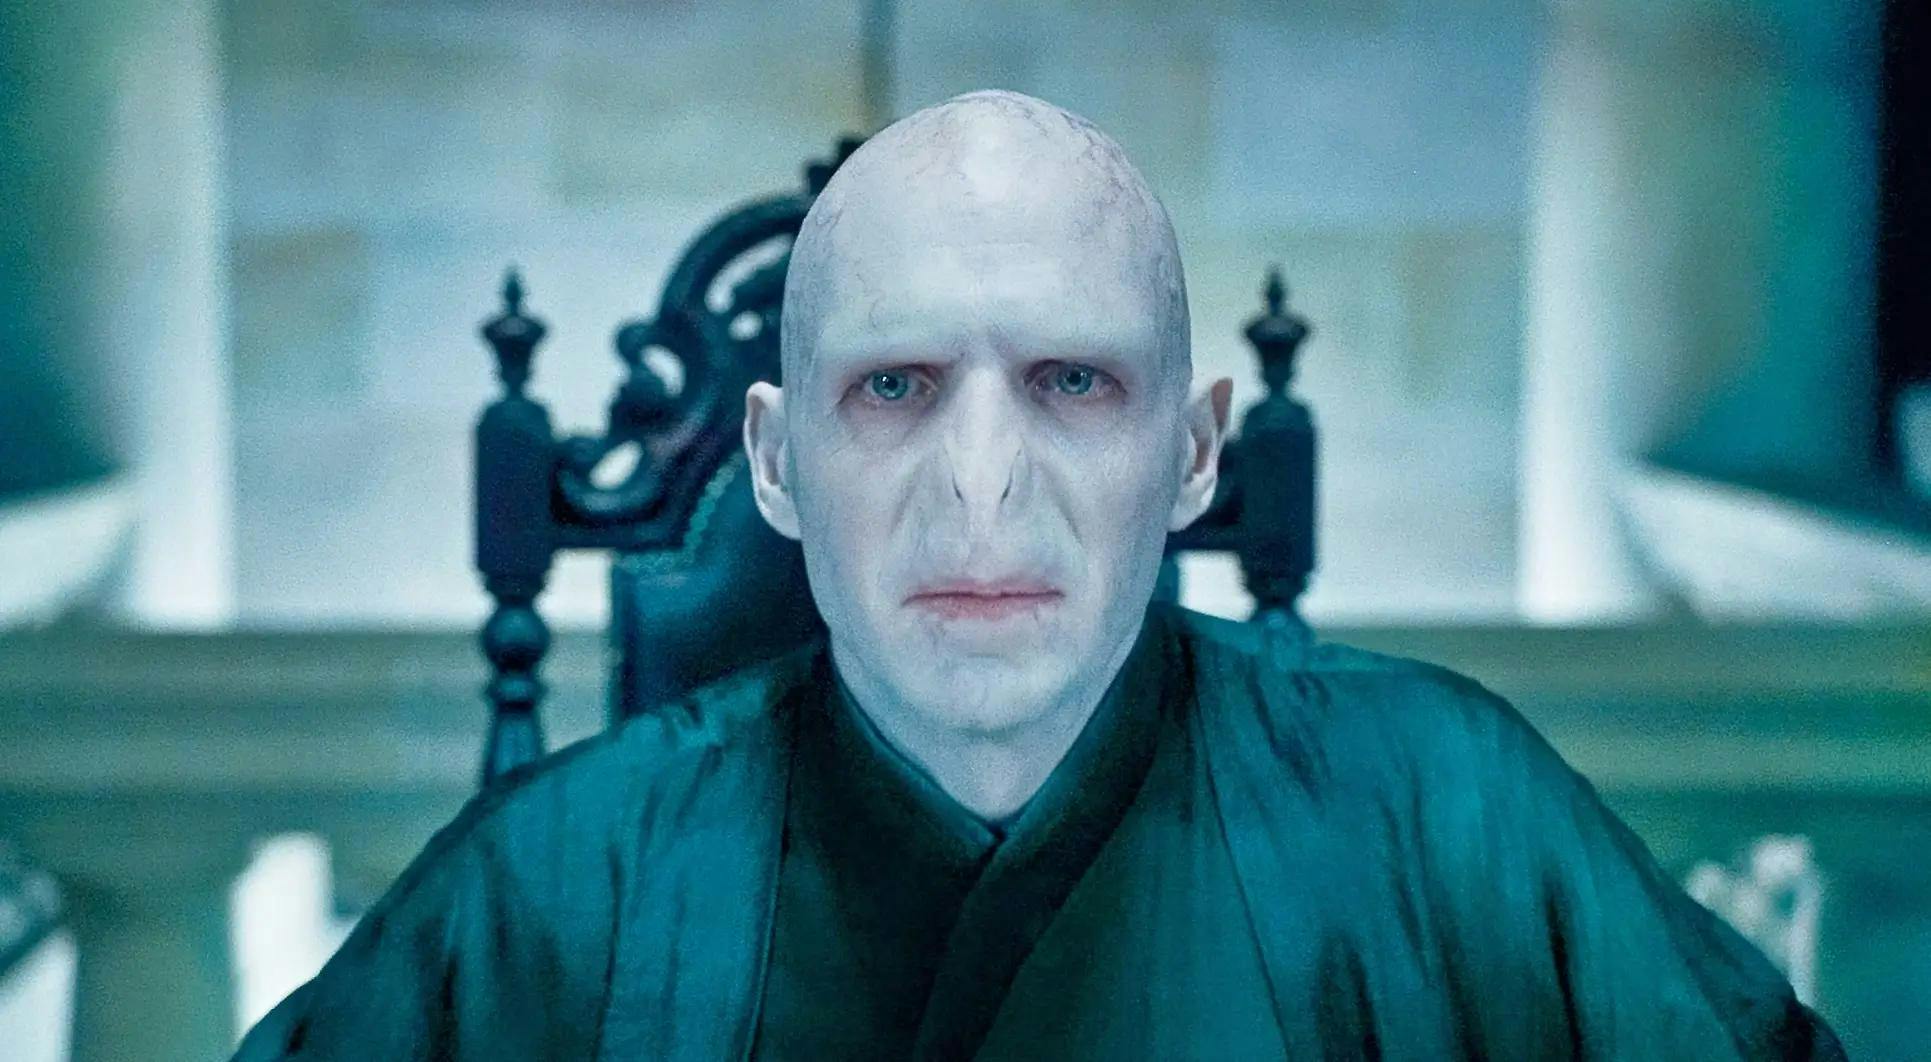 Lord Voldemort personality type